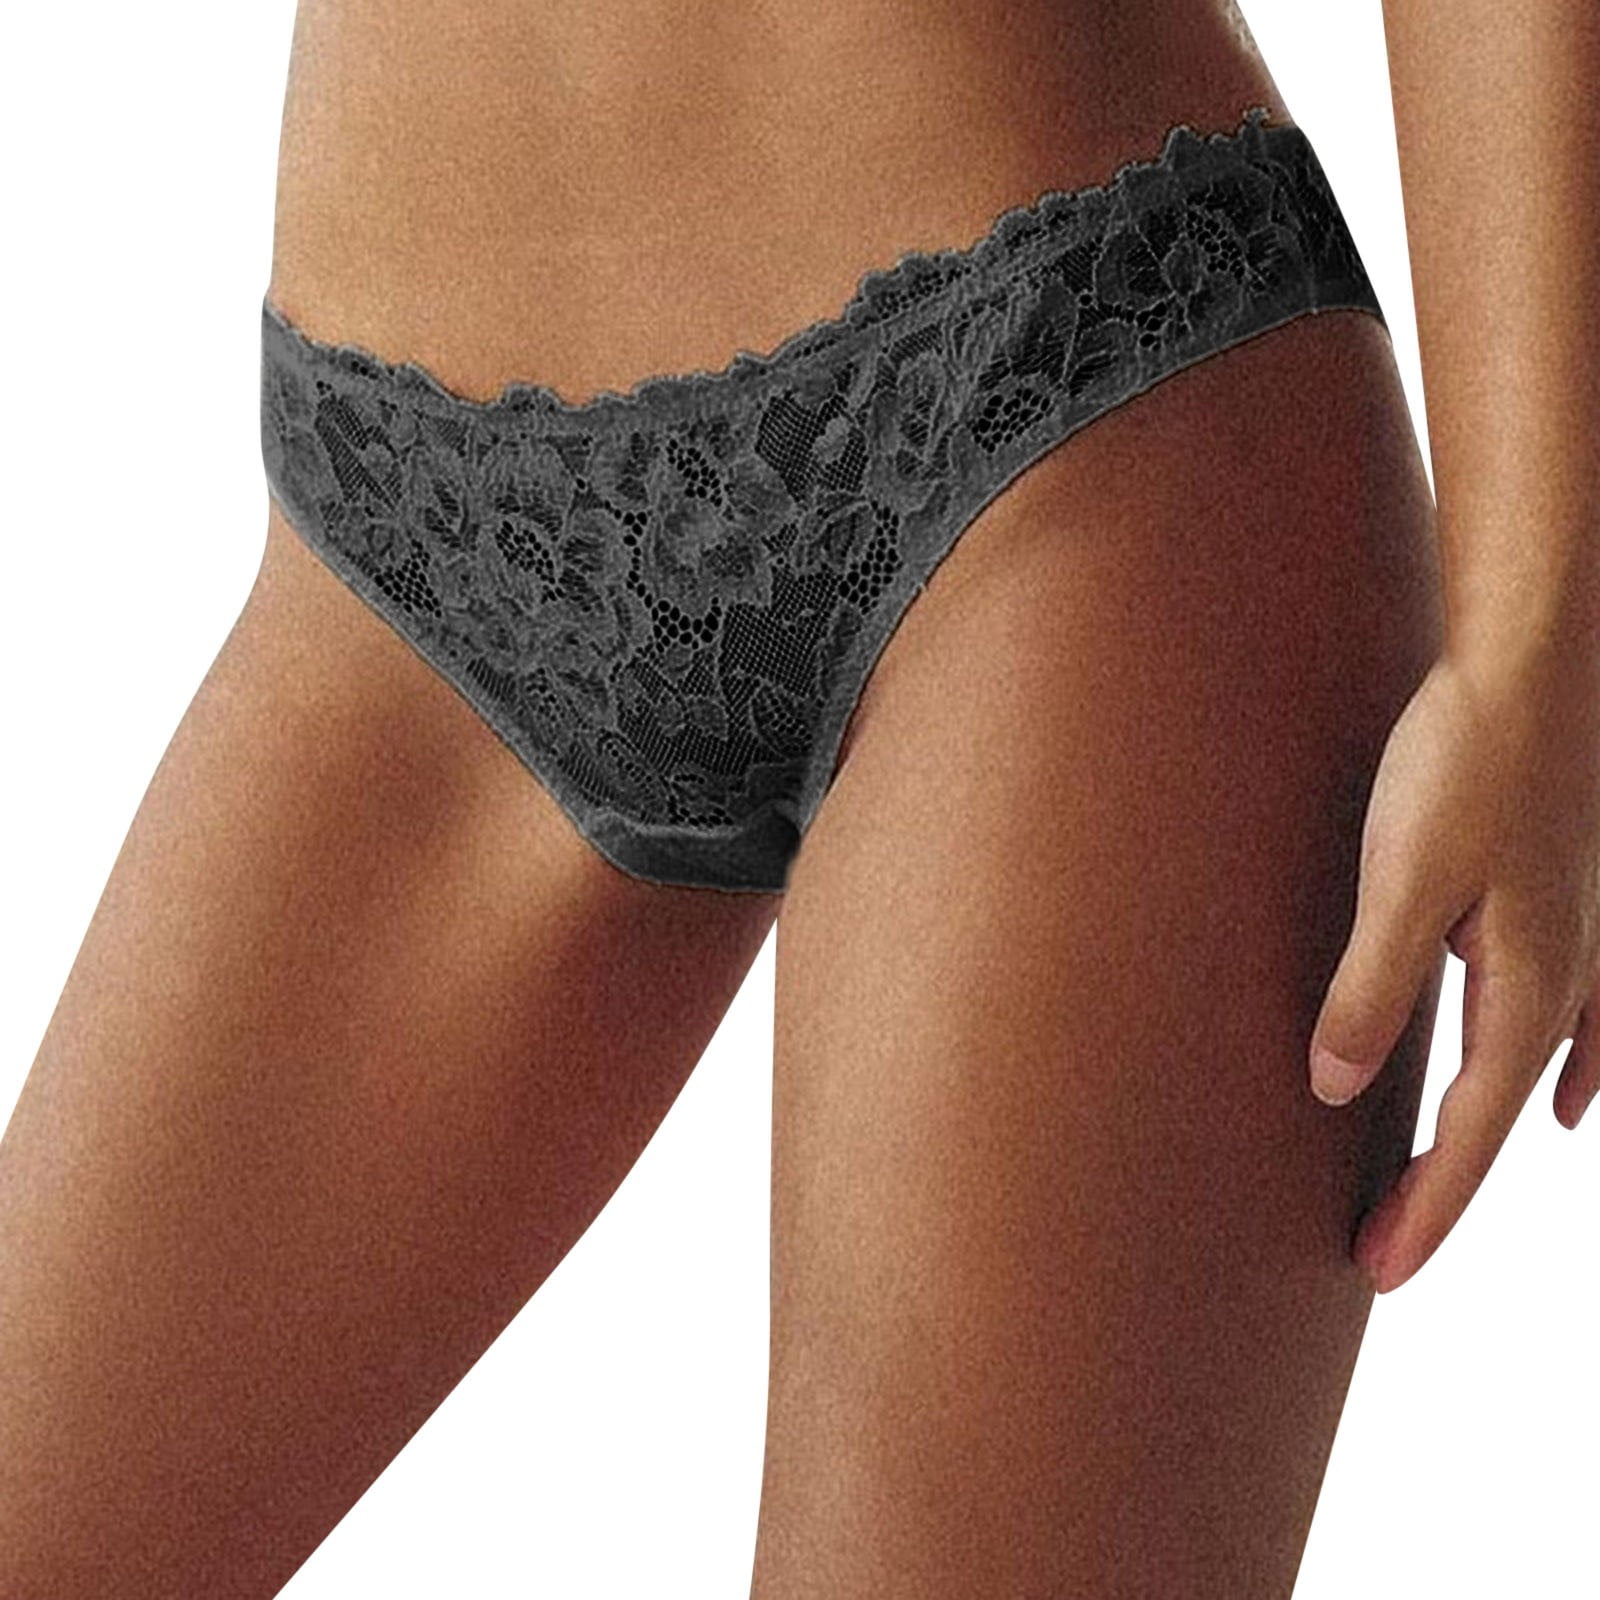 Uuszgmr Womens Lingeries Lace Floral Crochet Lace Rhinestone Underwear  Panty For Wedding Night,Romantic Valentine'S Day And Every Hot Sweet